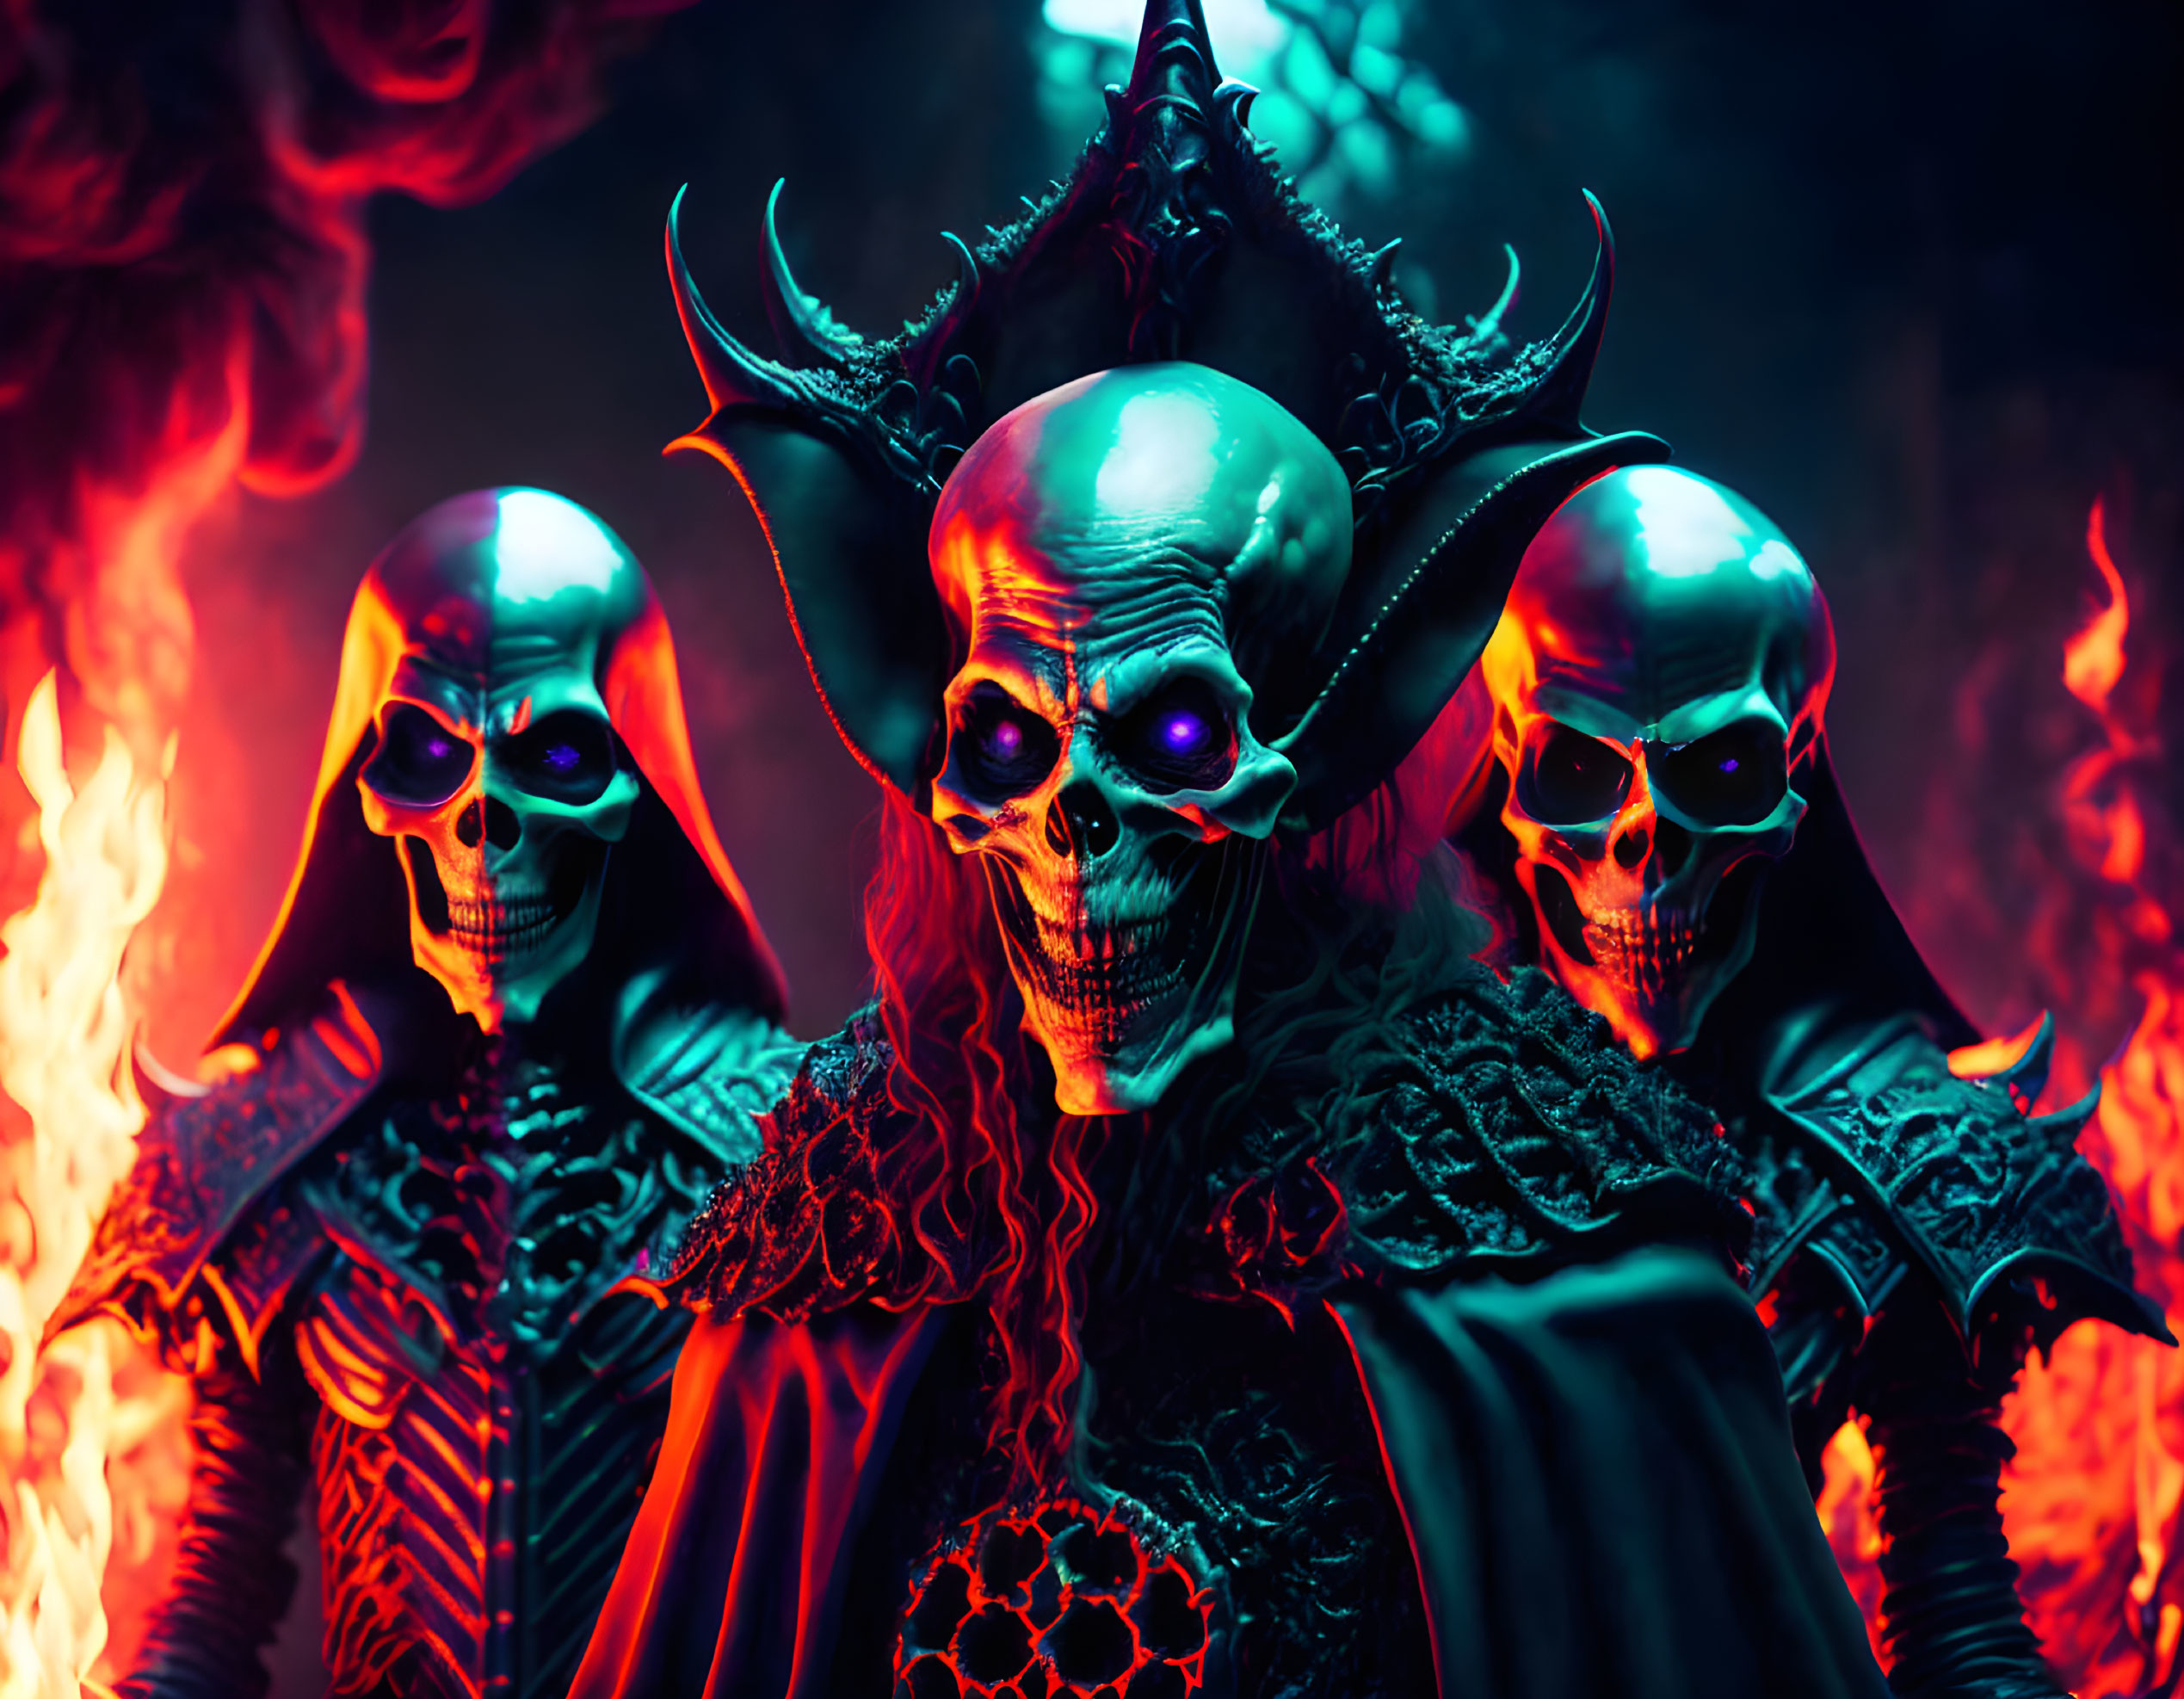 Three figures in dark ornate costumes with skull masks and horned headpieces, surrounded by red and